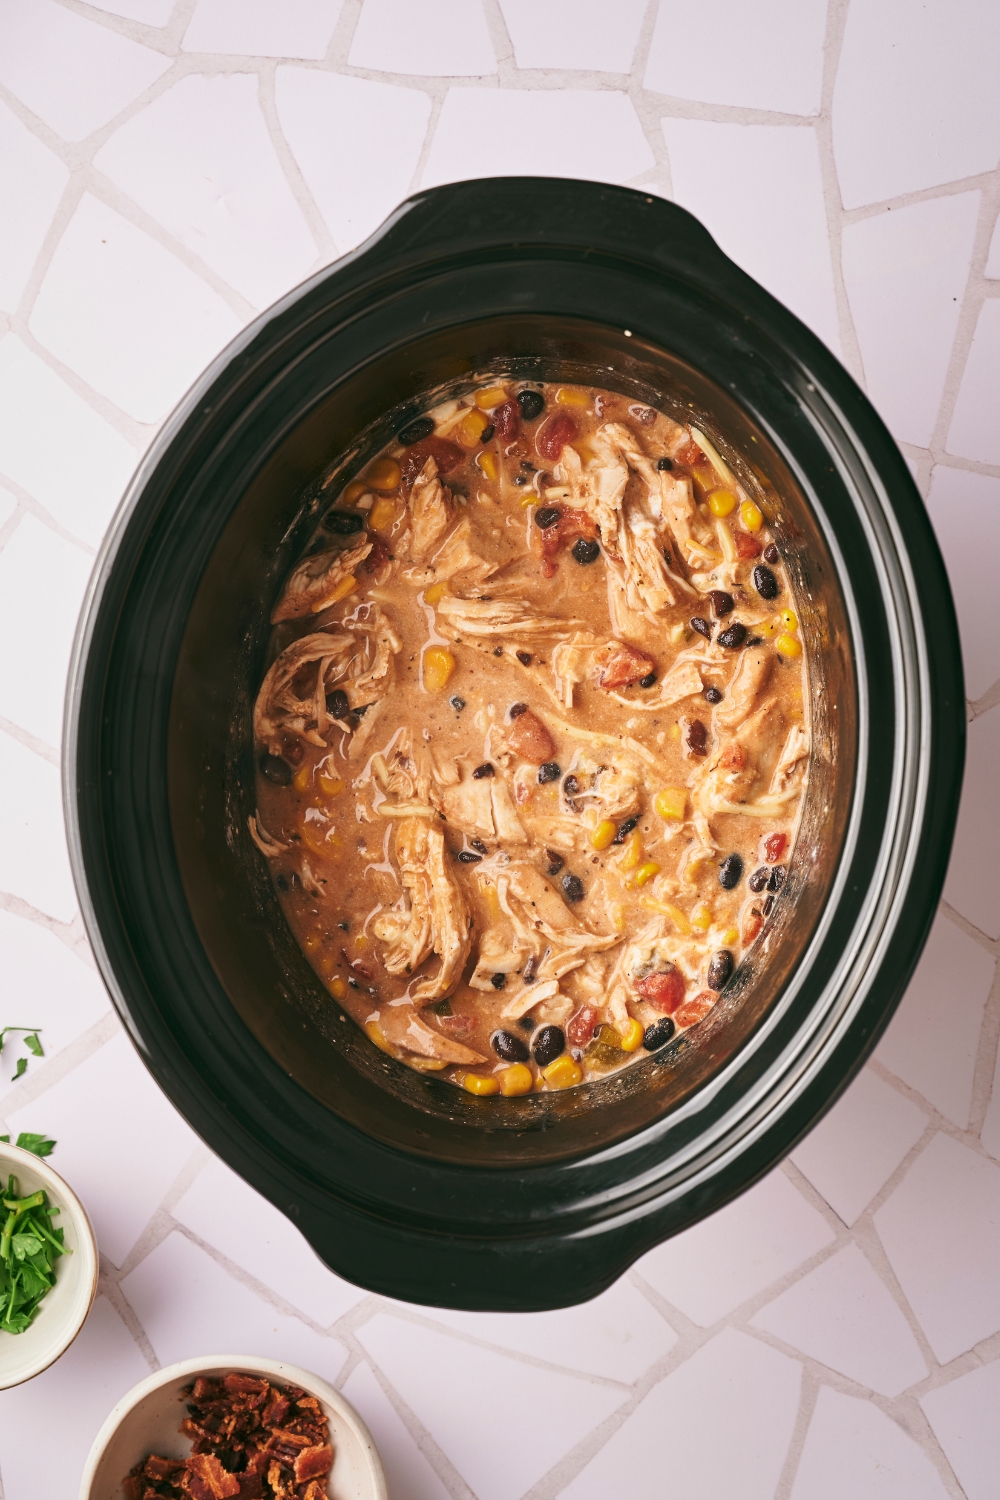 Shredded chicken, black beans, and corn in a creamy sauce in a crock pot.